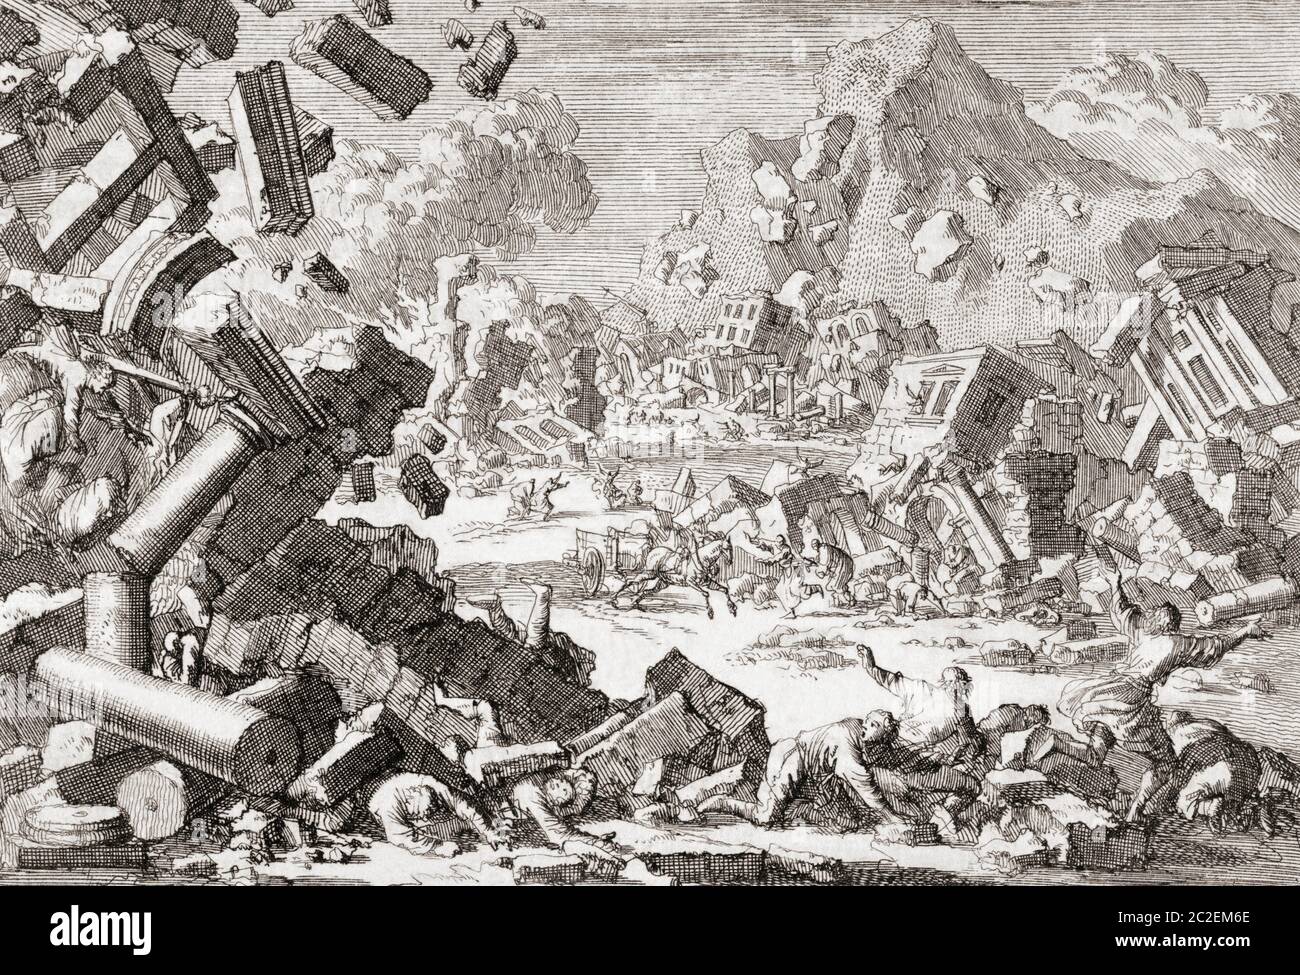 The earthquake of 1667 in Dubrovnik, Croatia, then the Republic of Ragusa.  After a work by Dutch illustrator Jan Luyken, 1649 - 1712. Stock Photo